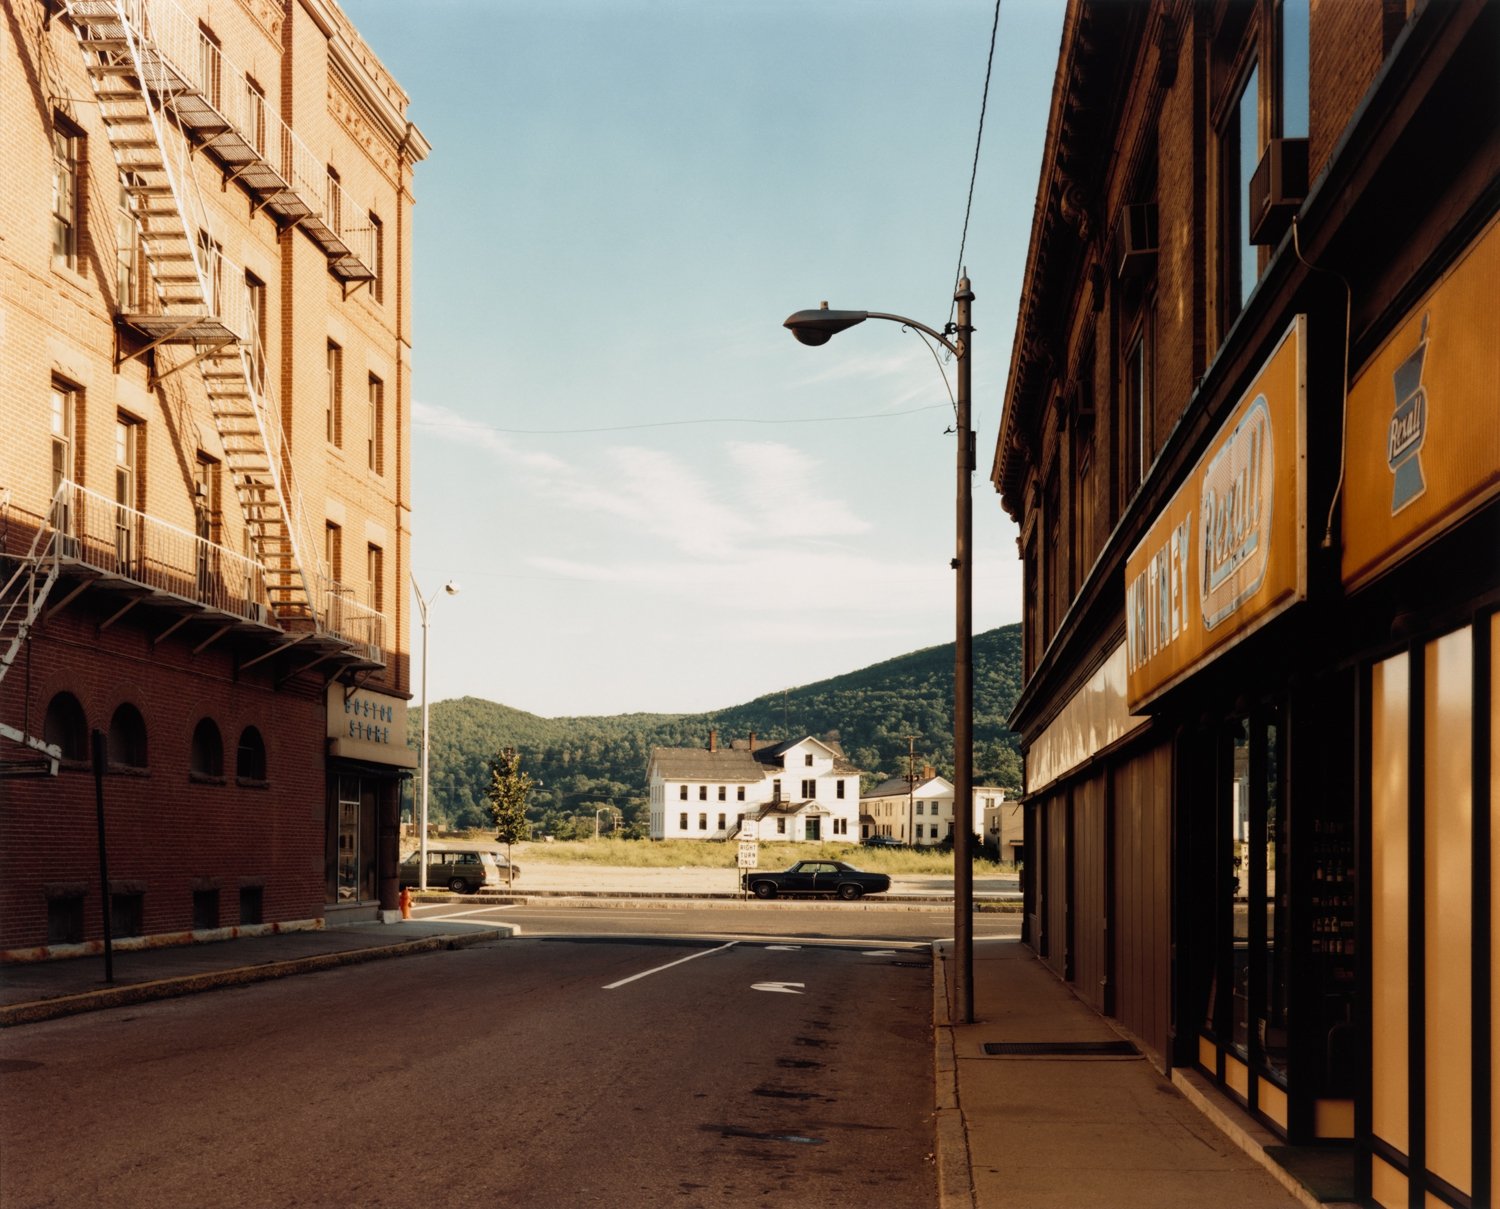  Stephen Shore,  Holden St., North Adams, Massachusetts,  July 13, 1974, 1974. Courtesy of the Pilara Family Foundation Collection and Sotheby’s.&nbsp; 